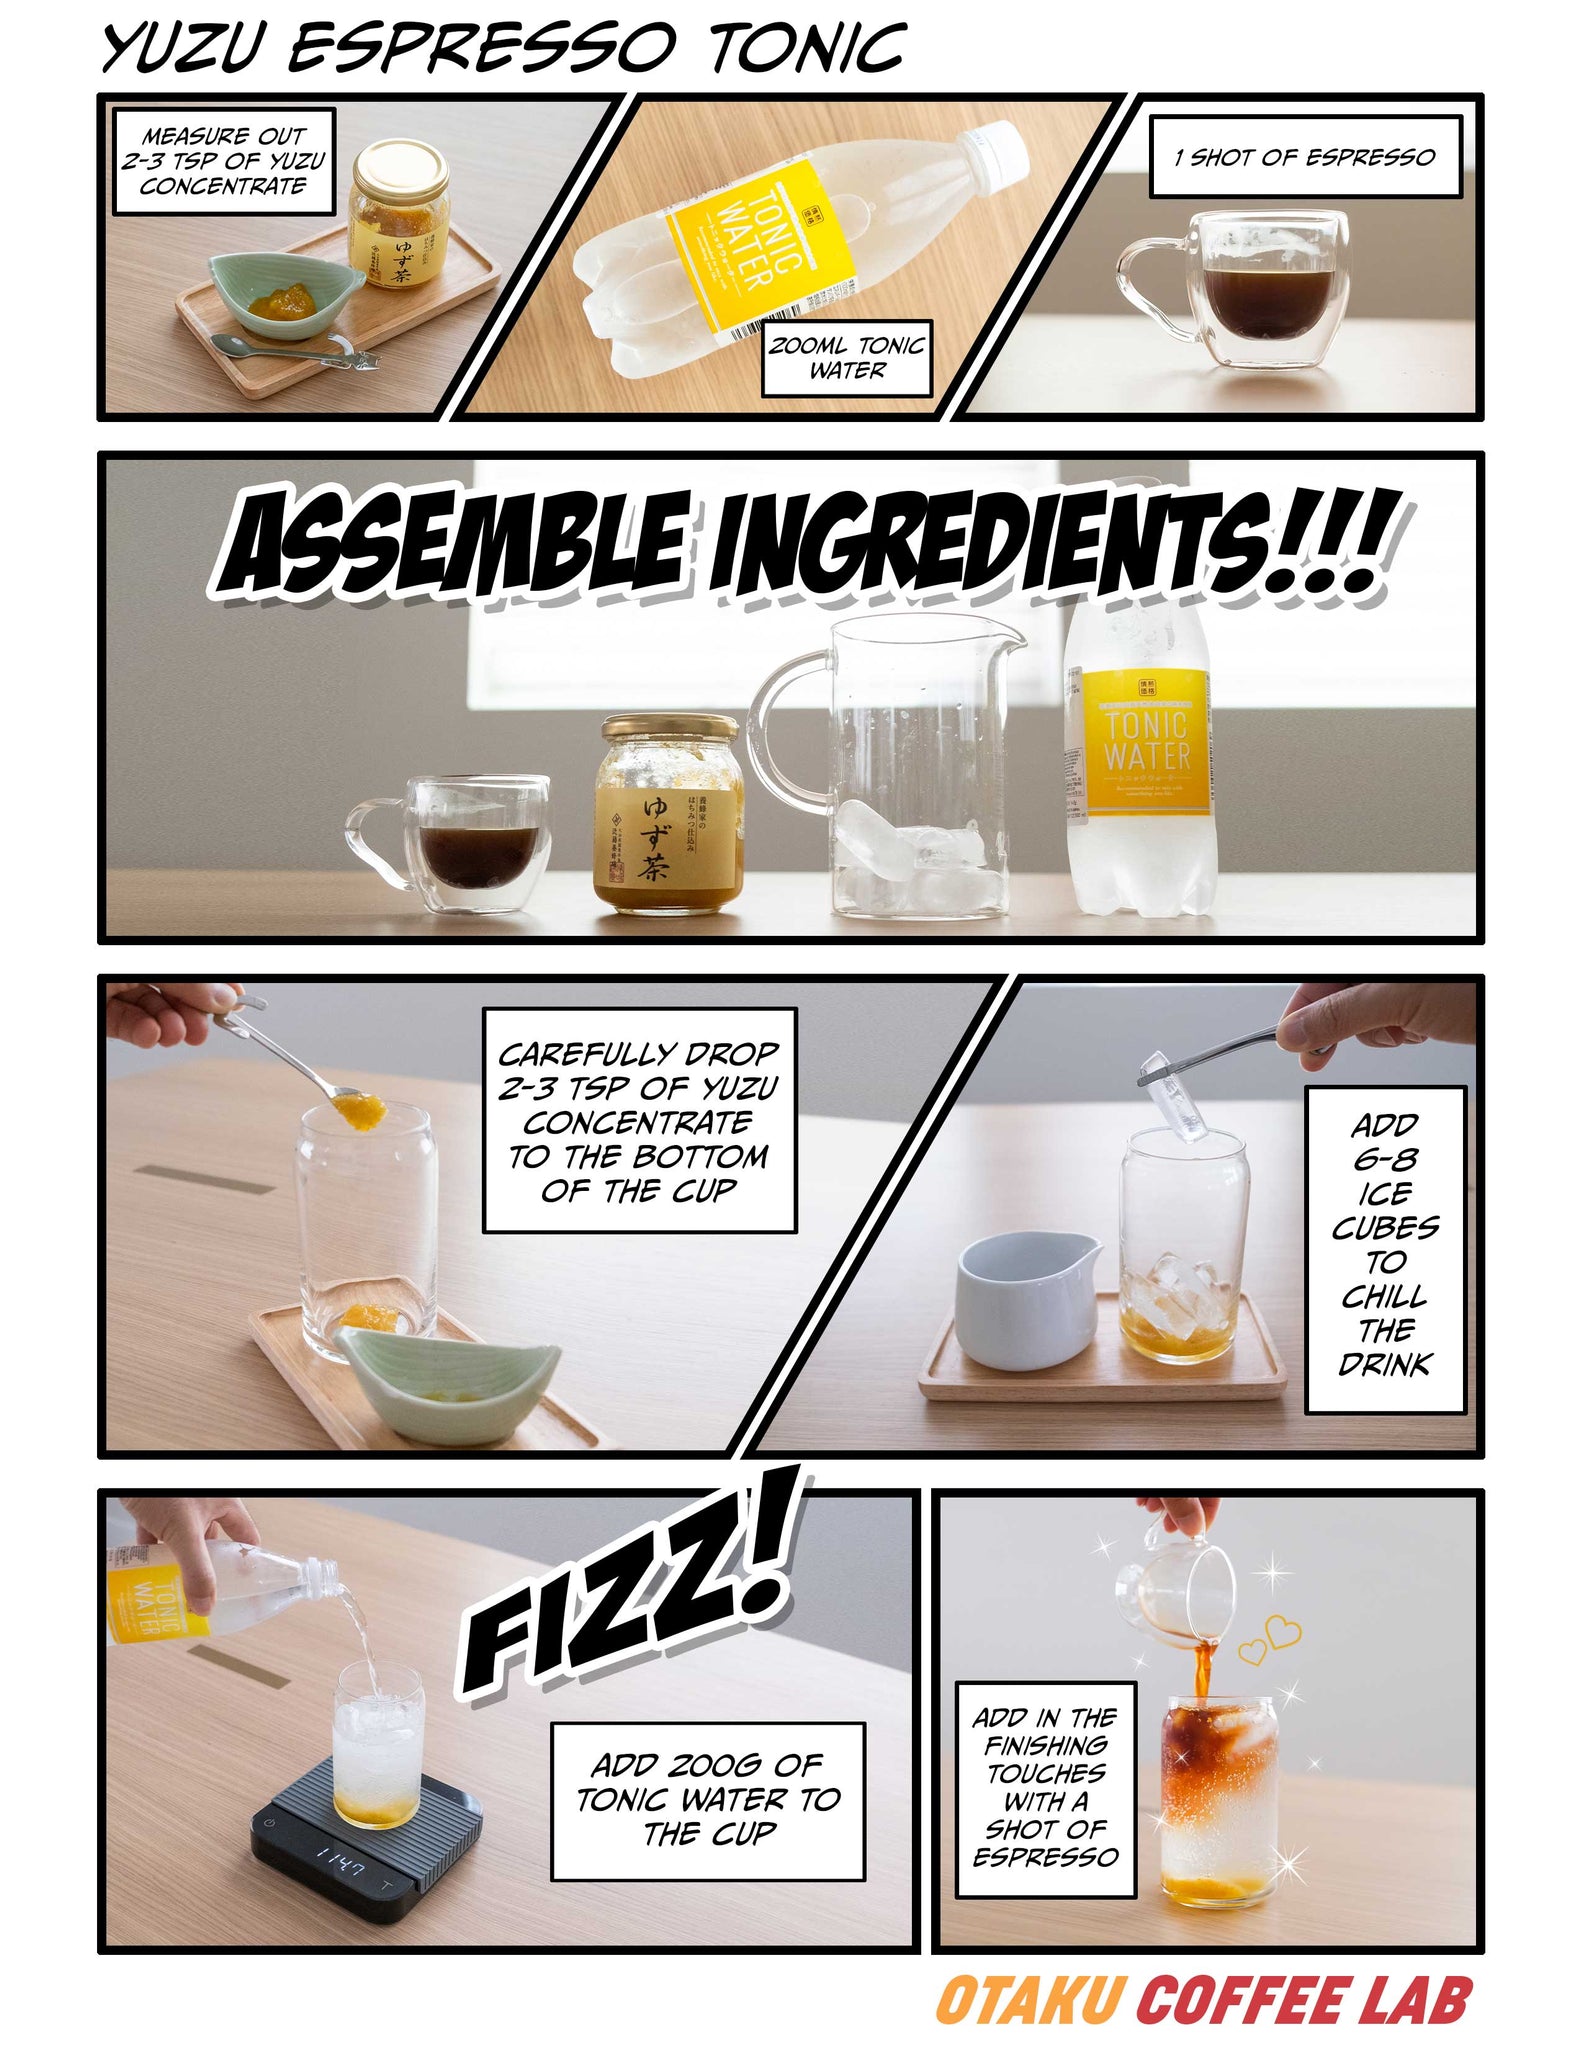 Page one of a manga comic illustrating a coffee recipe on how to make a Yuzu Espresso Tonic